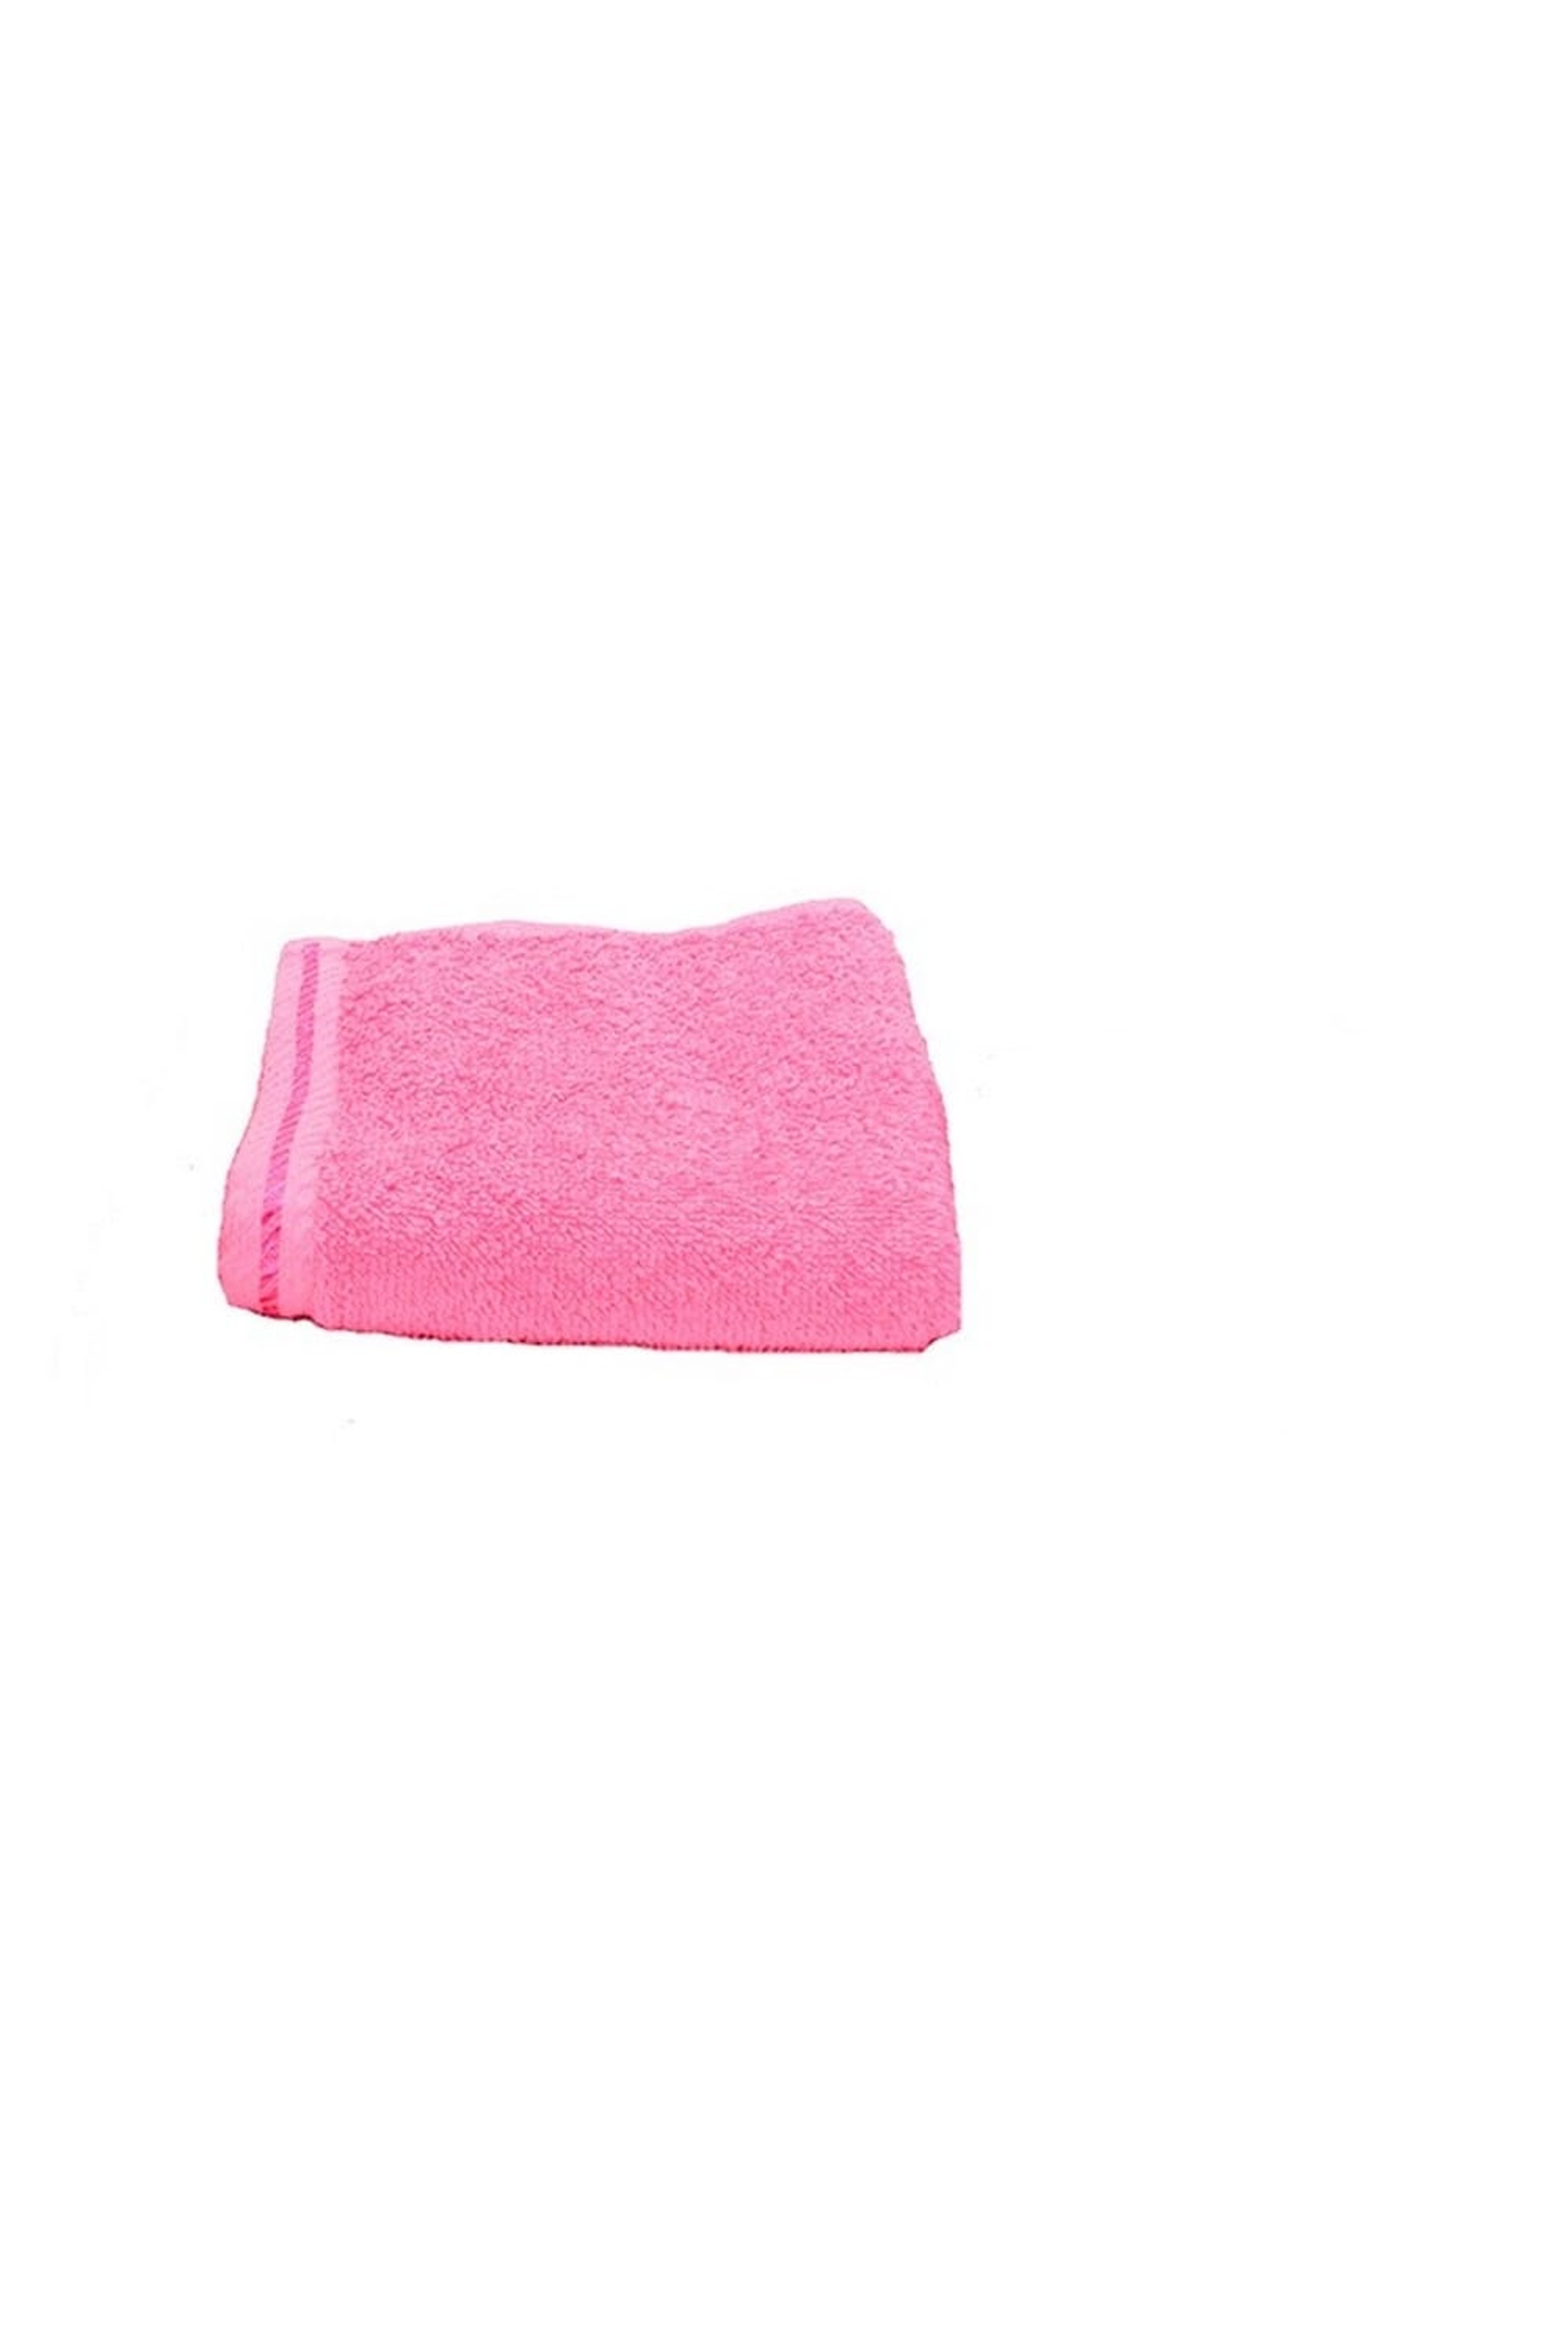 A&R TOWELS A&R TOWELS A&R TOWELS ULTRA SOFT GUEST TOWEL (PINK) (ONE SIZE)